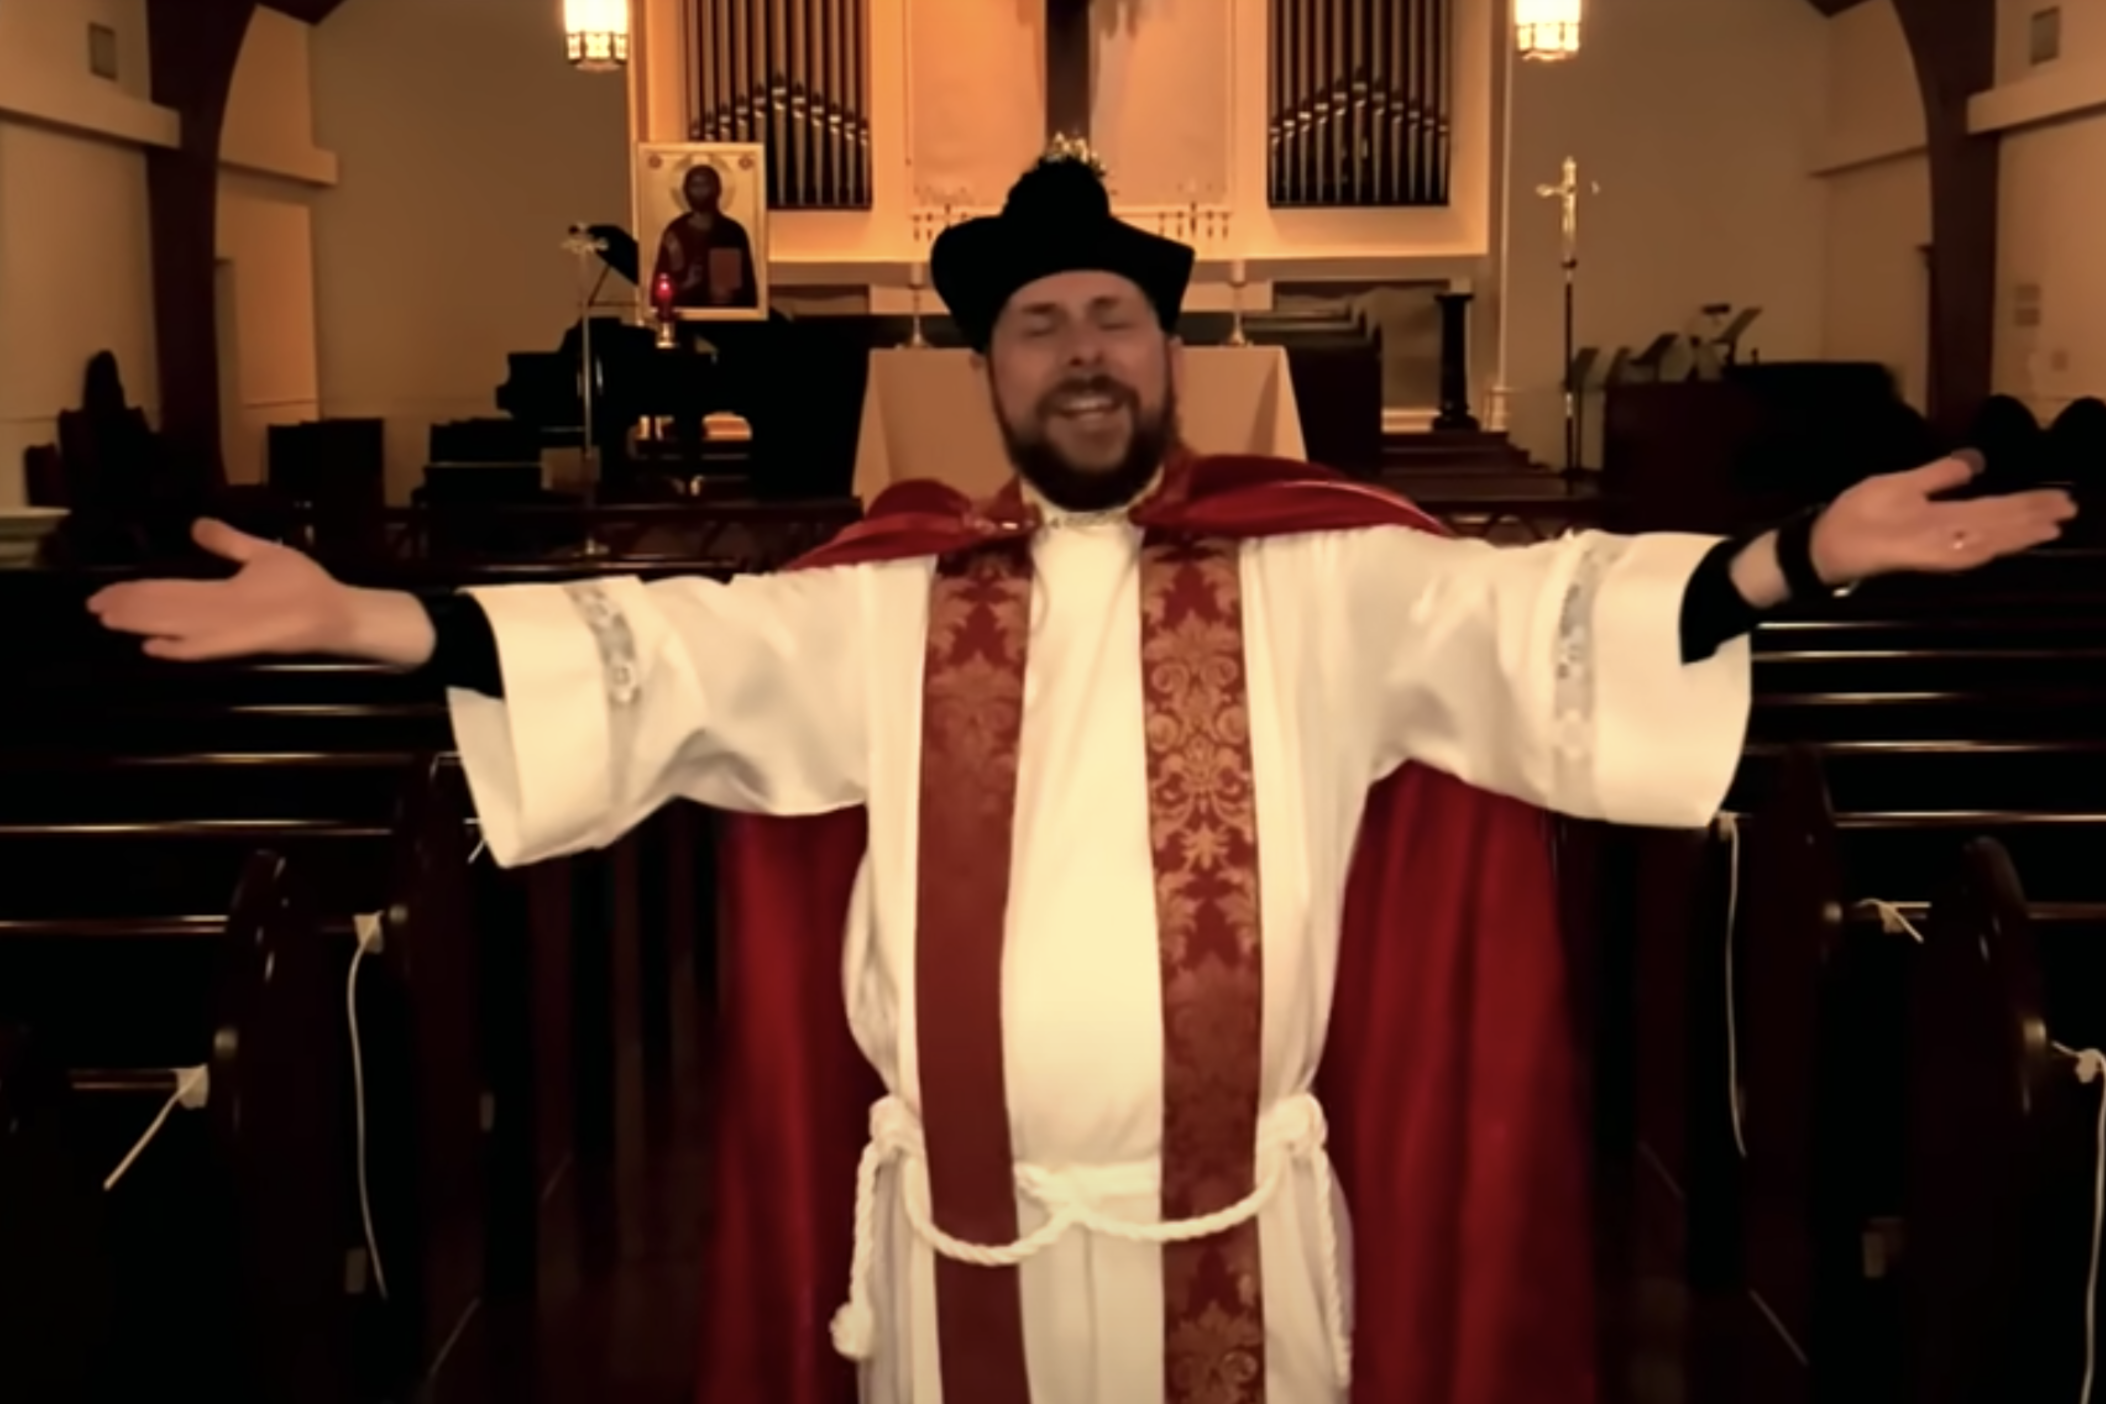 The Tifton pastor behind a viral Hamilton music video said he hopes it will be a "shot of hope" for his congregation and community.